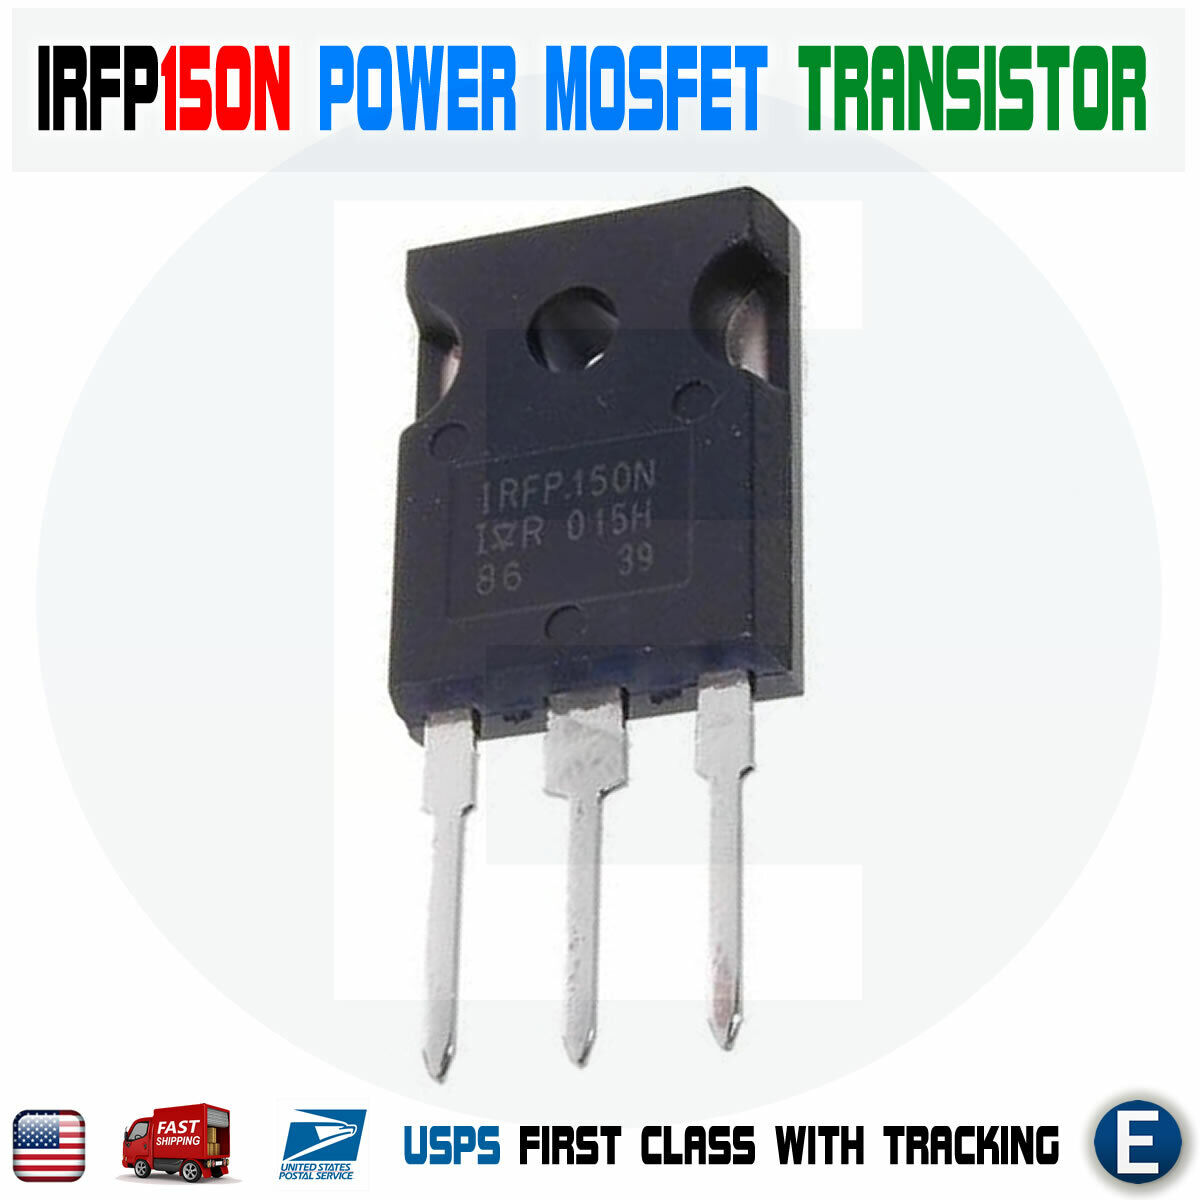  IRFP150N Transistor N-MOSFET 100V 42A 160W TO-247  IRFP150 N-Channel Power